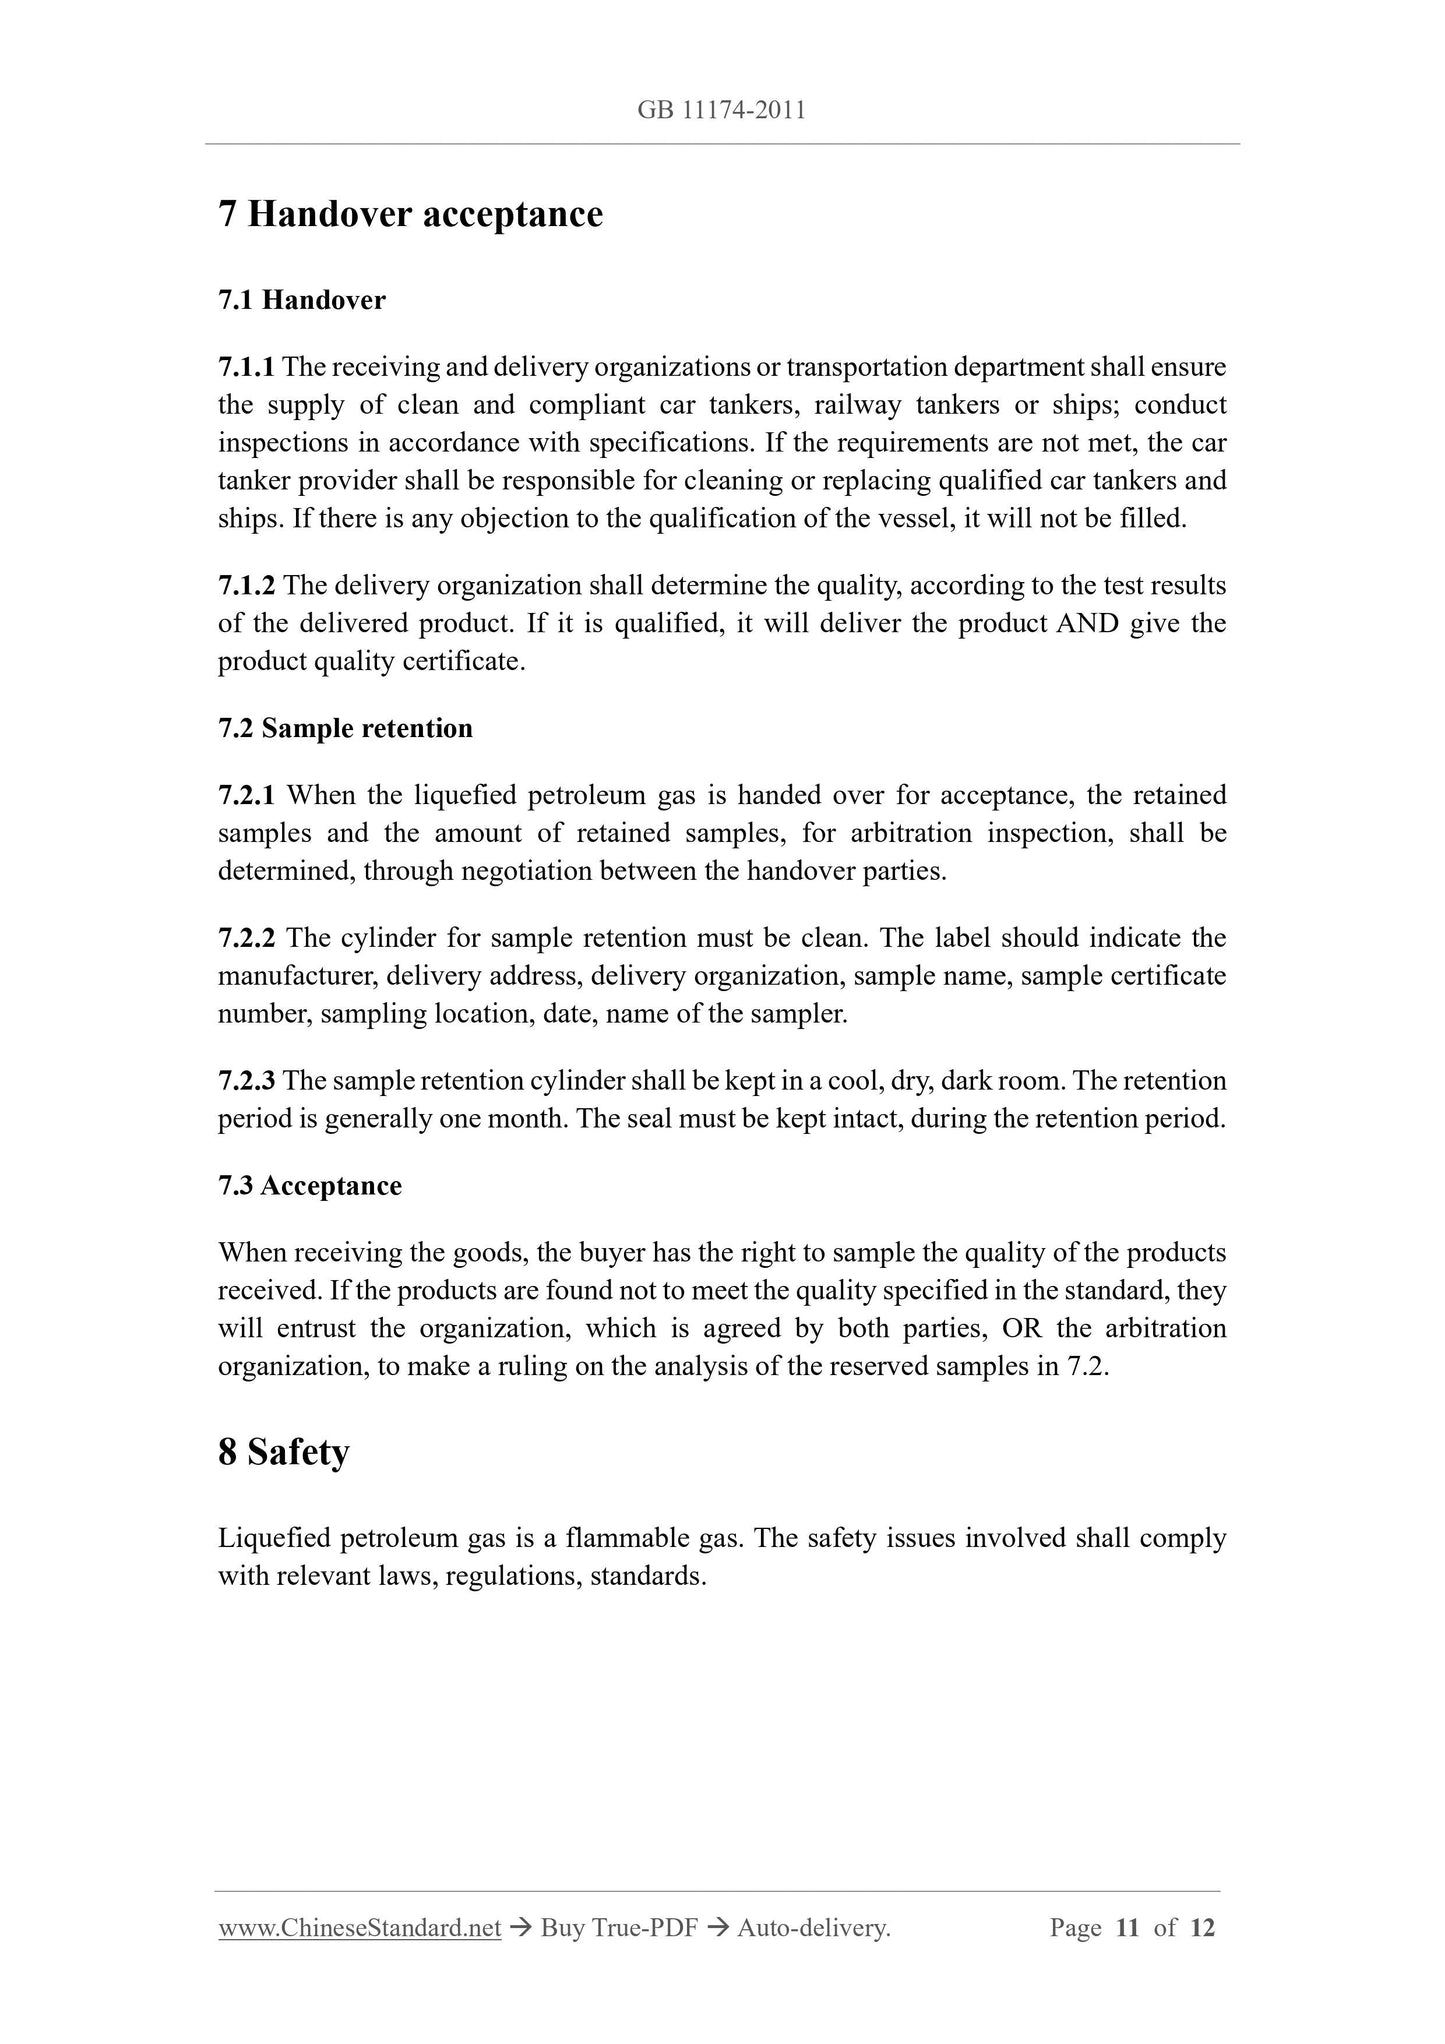 GB 11174-2011 Page 6